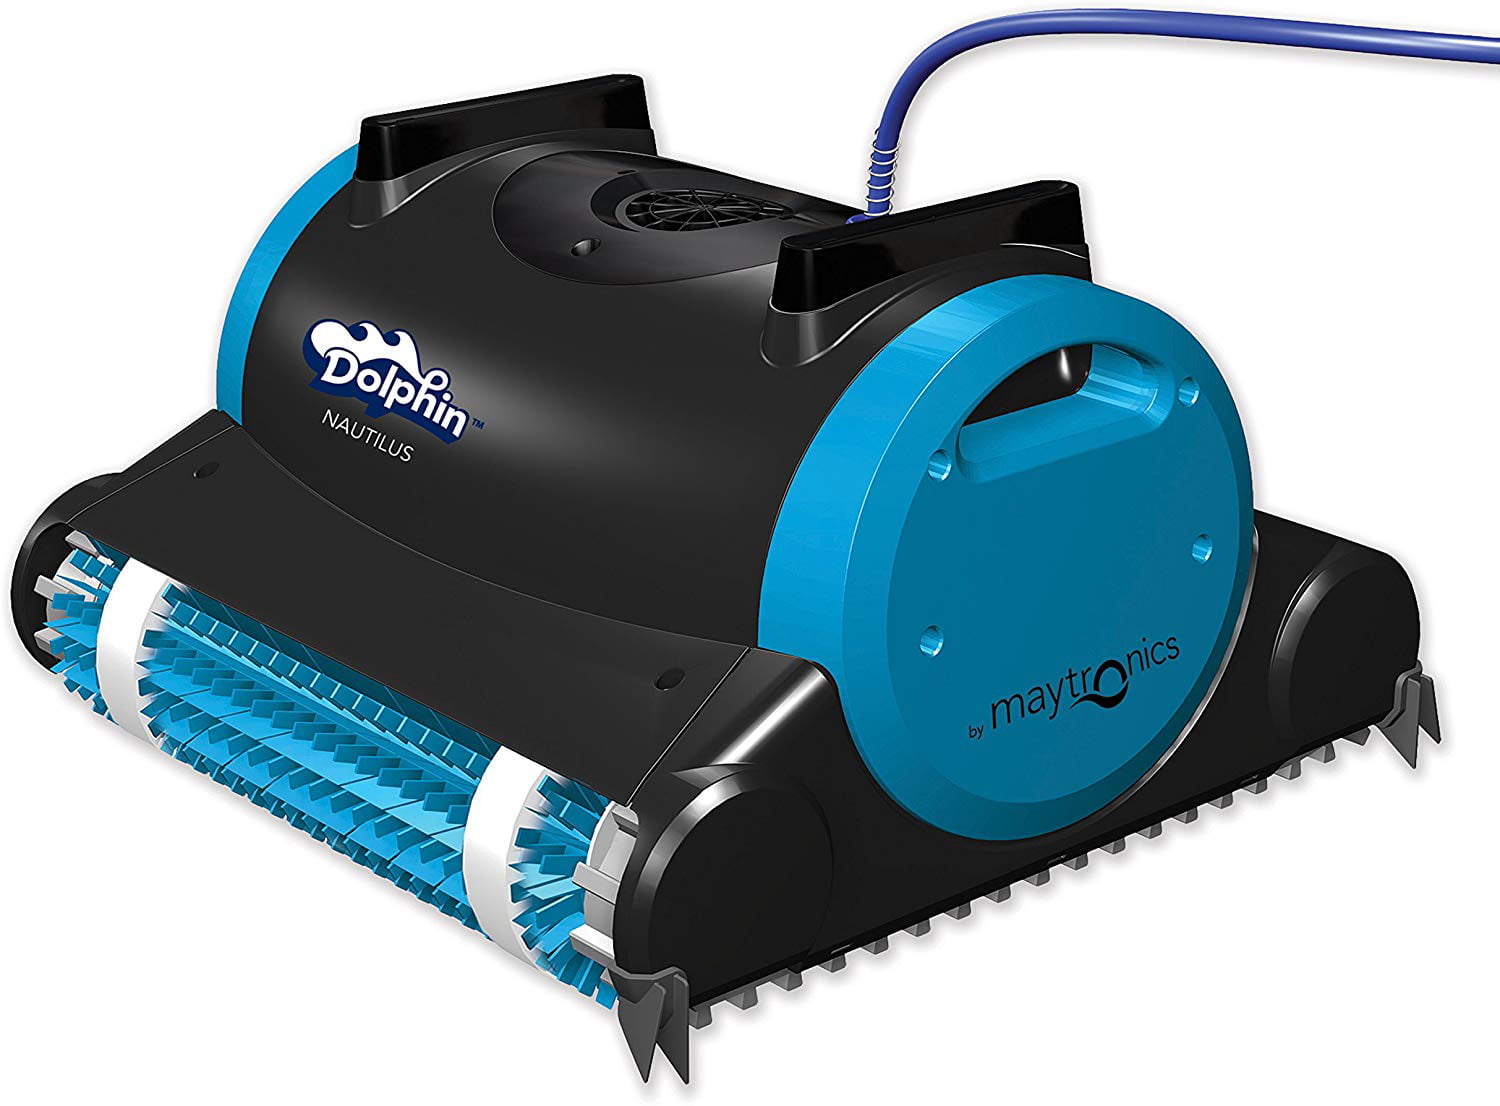 swimming-pool-tips-and-reviews-dolphin-s300i-robotic-pool-cleaner-by